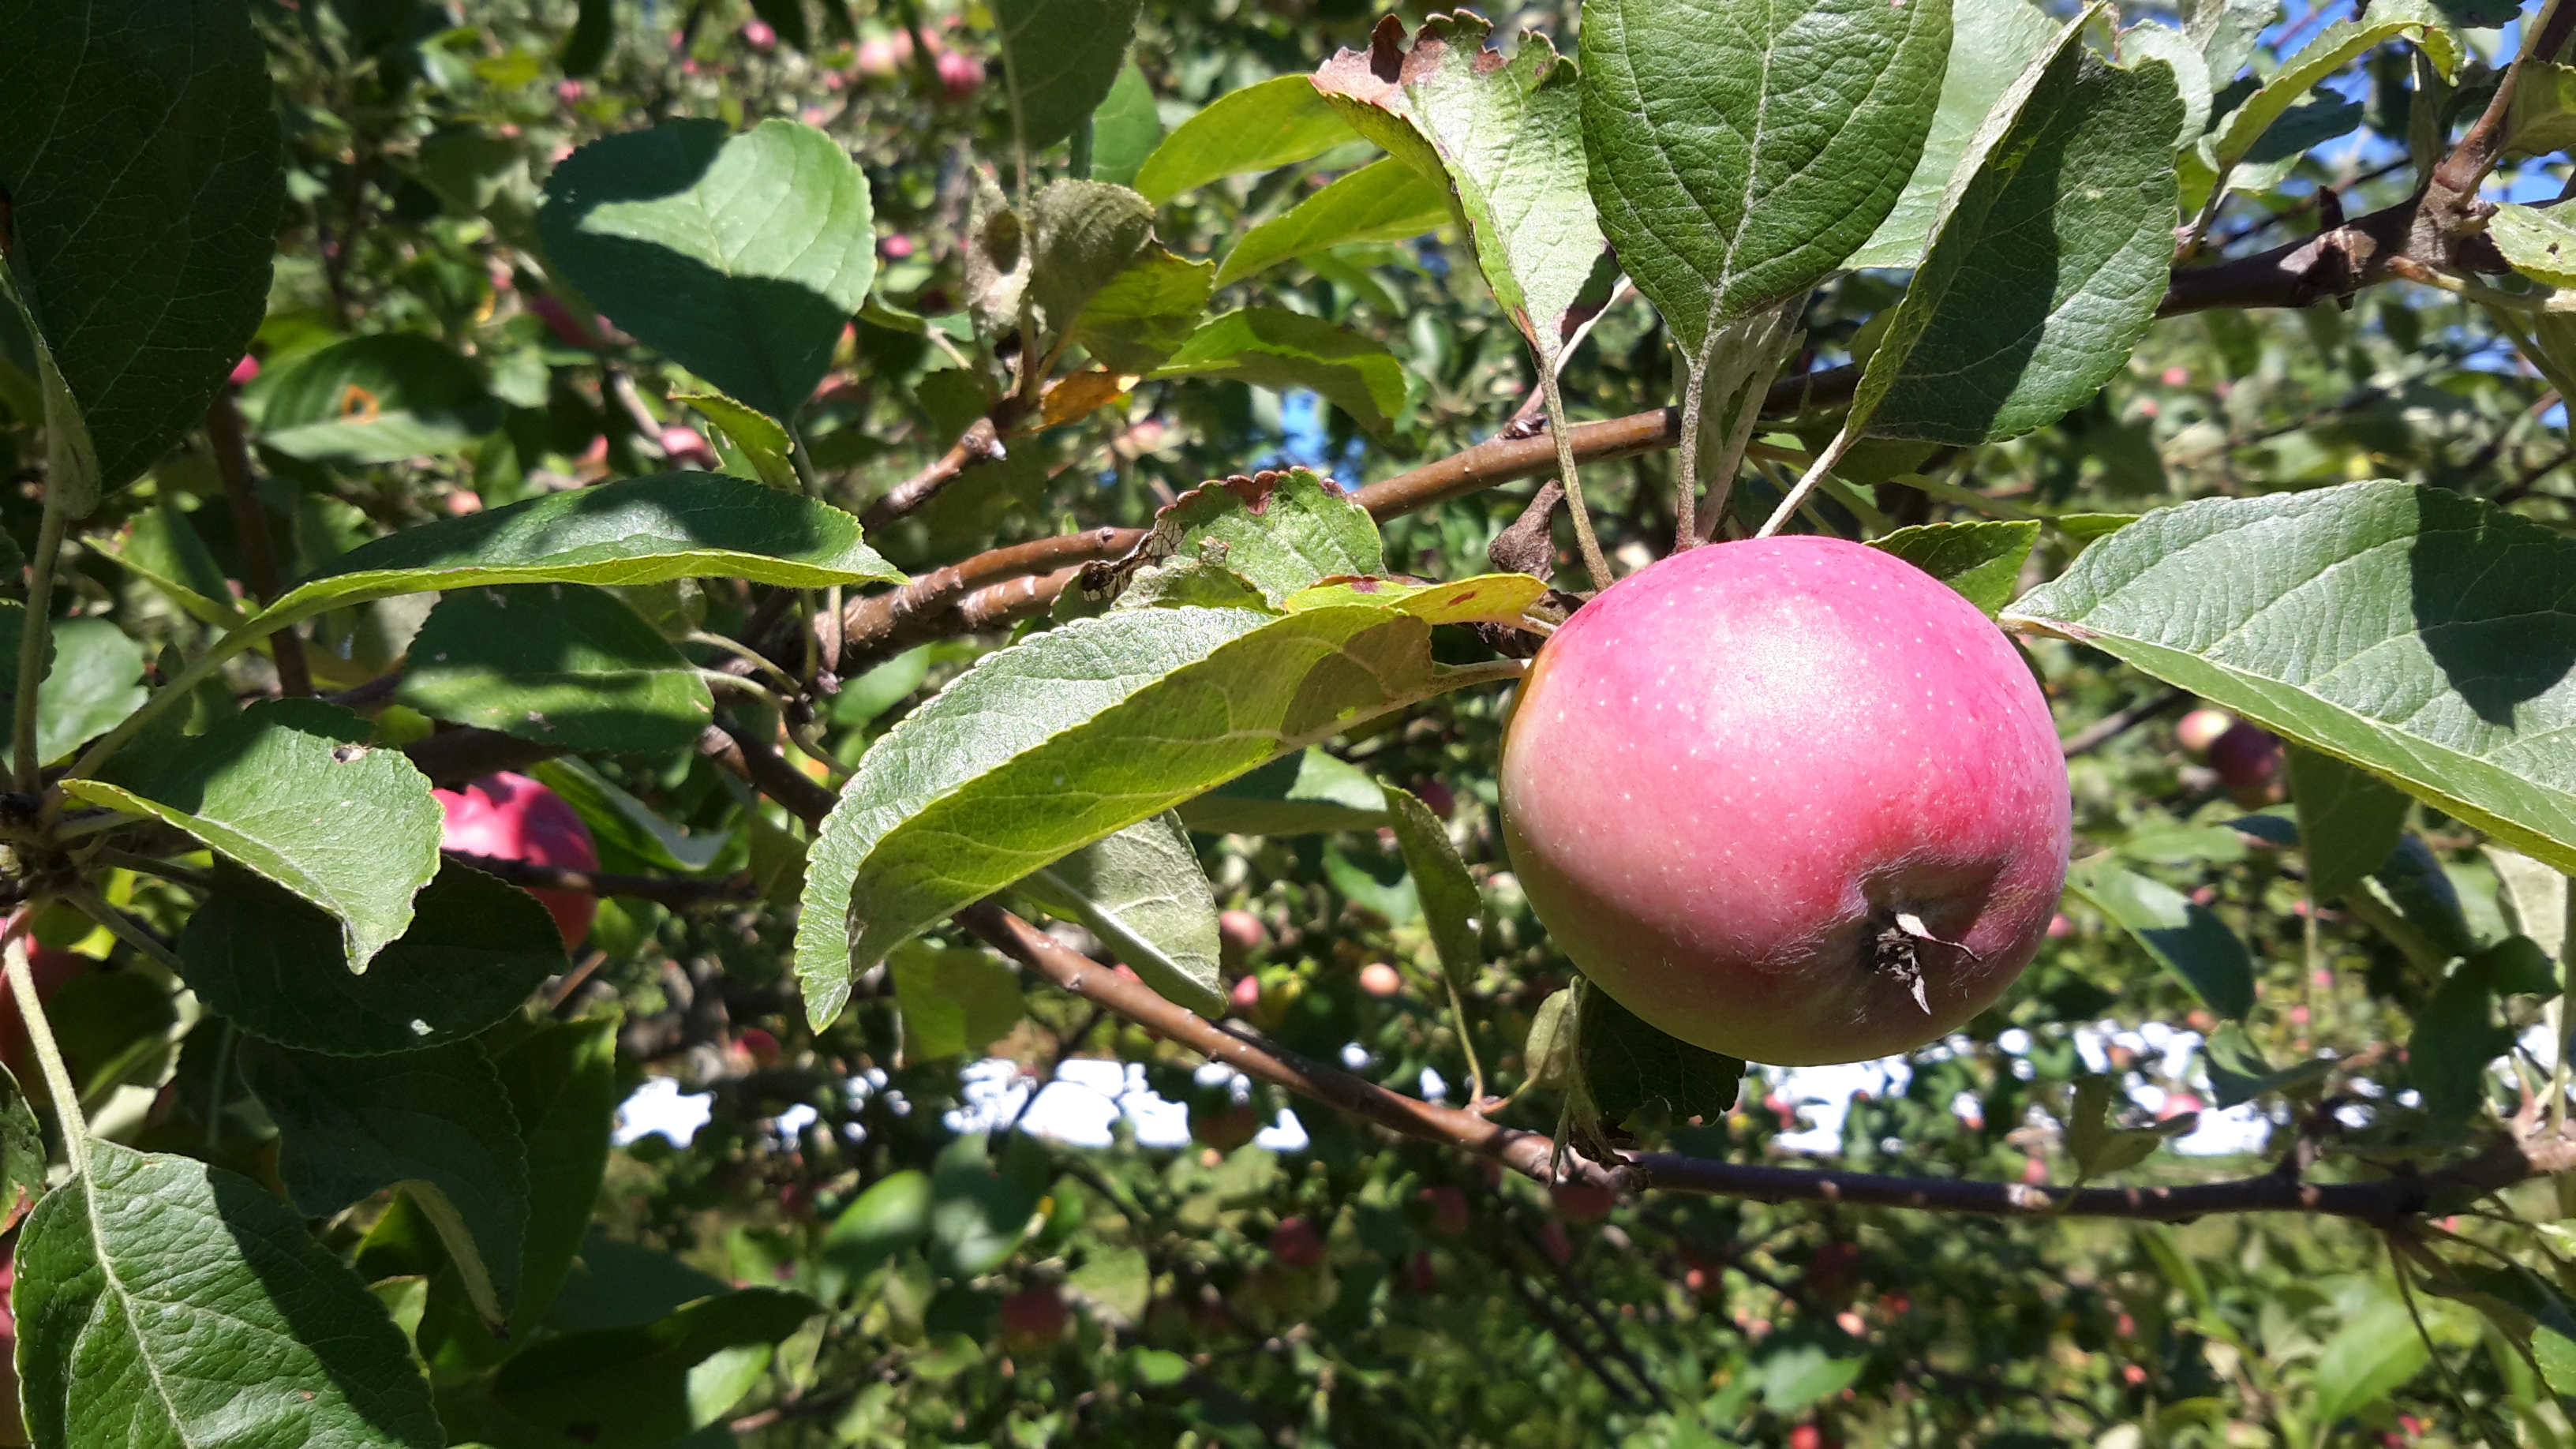 pic_3_orchard26Aug2020